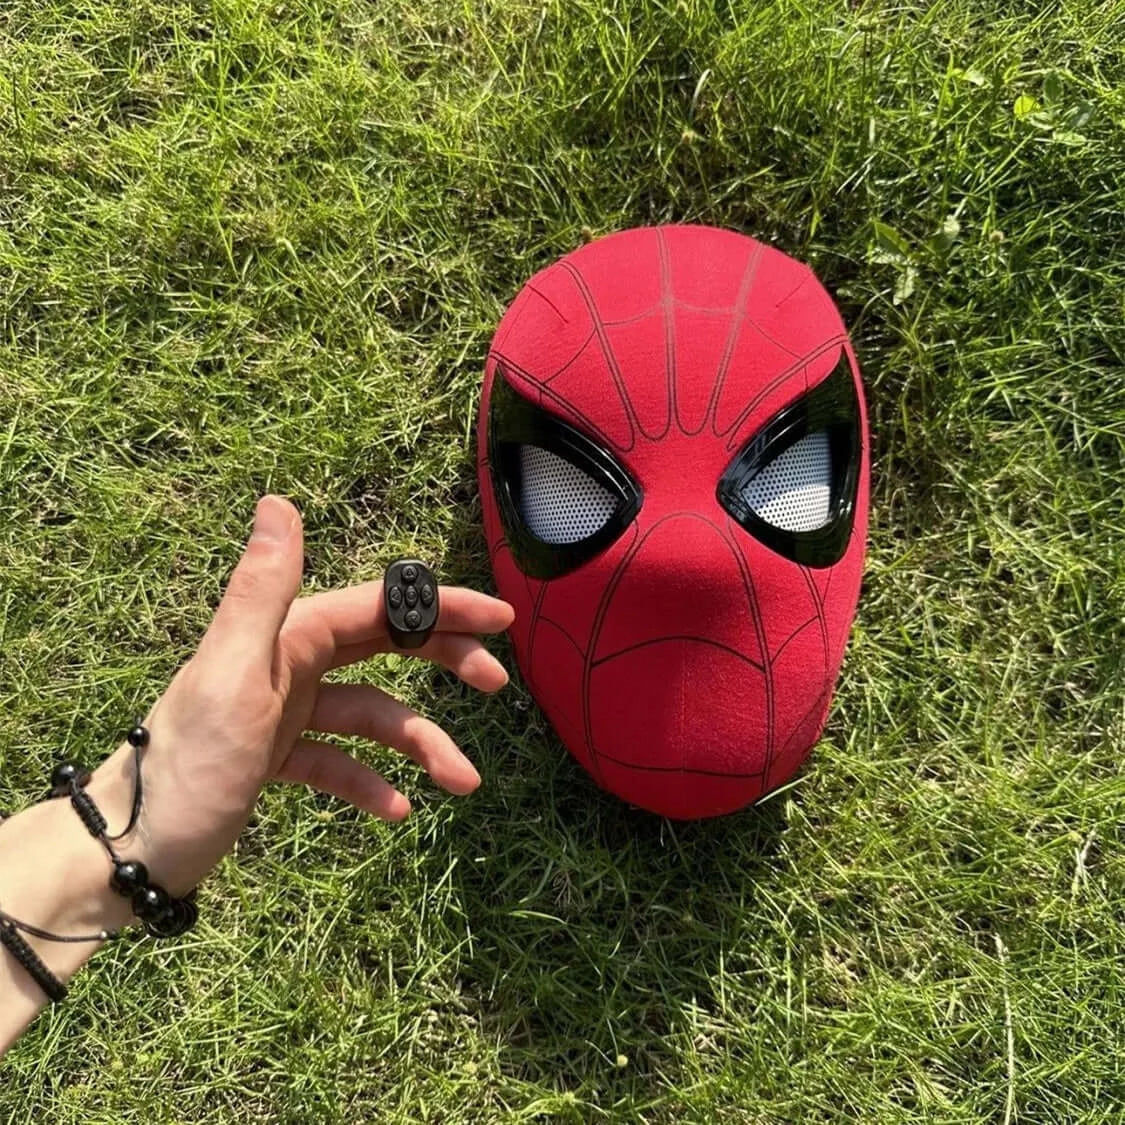 Mascara Spiderman Headgear Cosplay Moving Eyes Electronic Mask Spider Man  1:1 Remote Control Elastic Toys For Adults Kids Gift